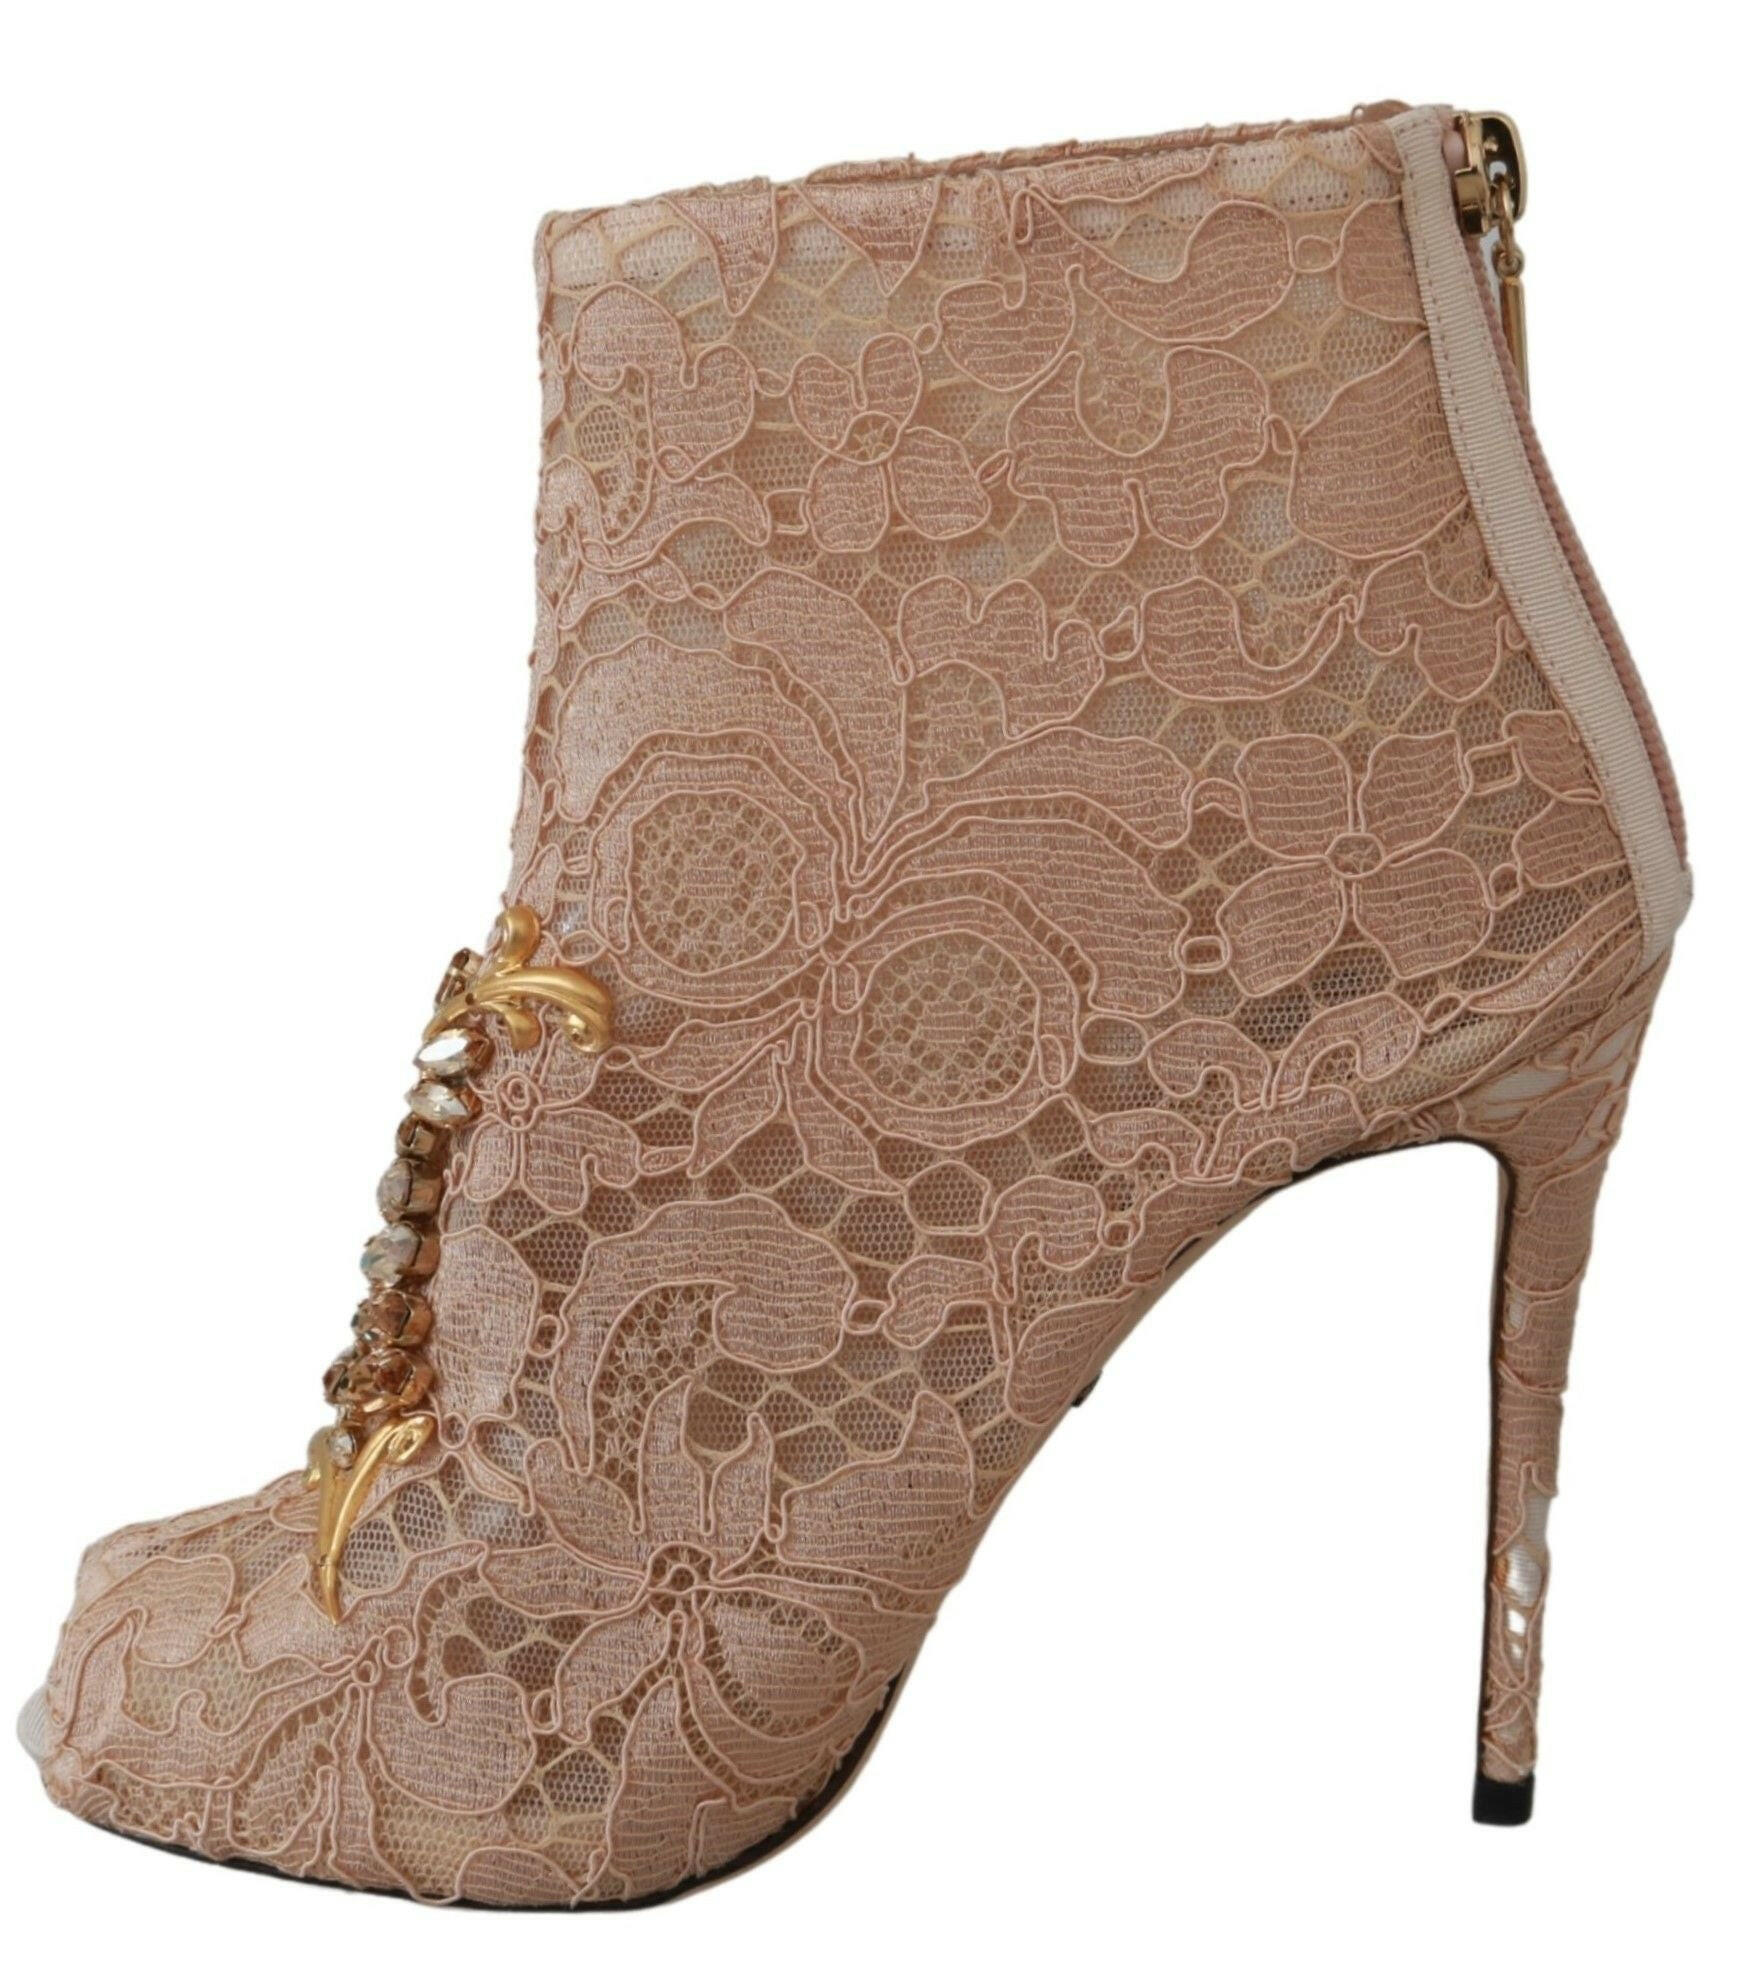 Dolce & Gabbana Pink Crystal Lace Booties Stilettos Shoes - GENUINE AUTHENTIC BRAND LLC  